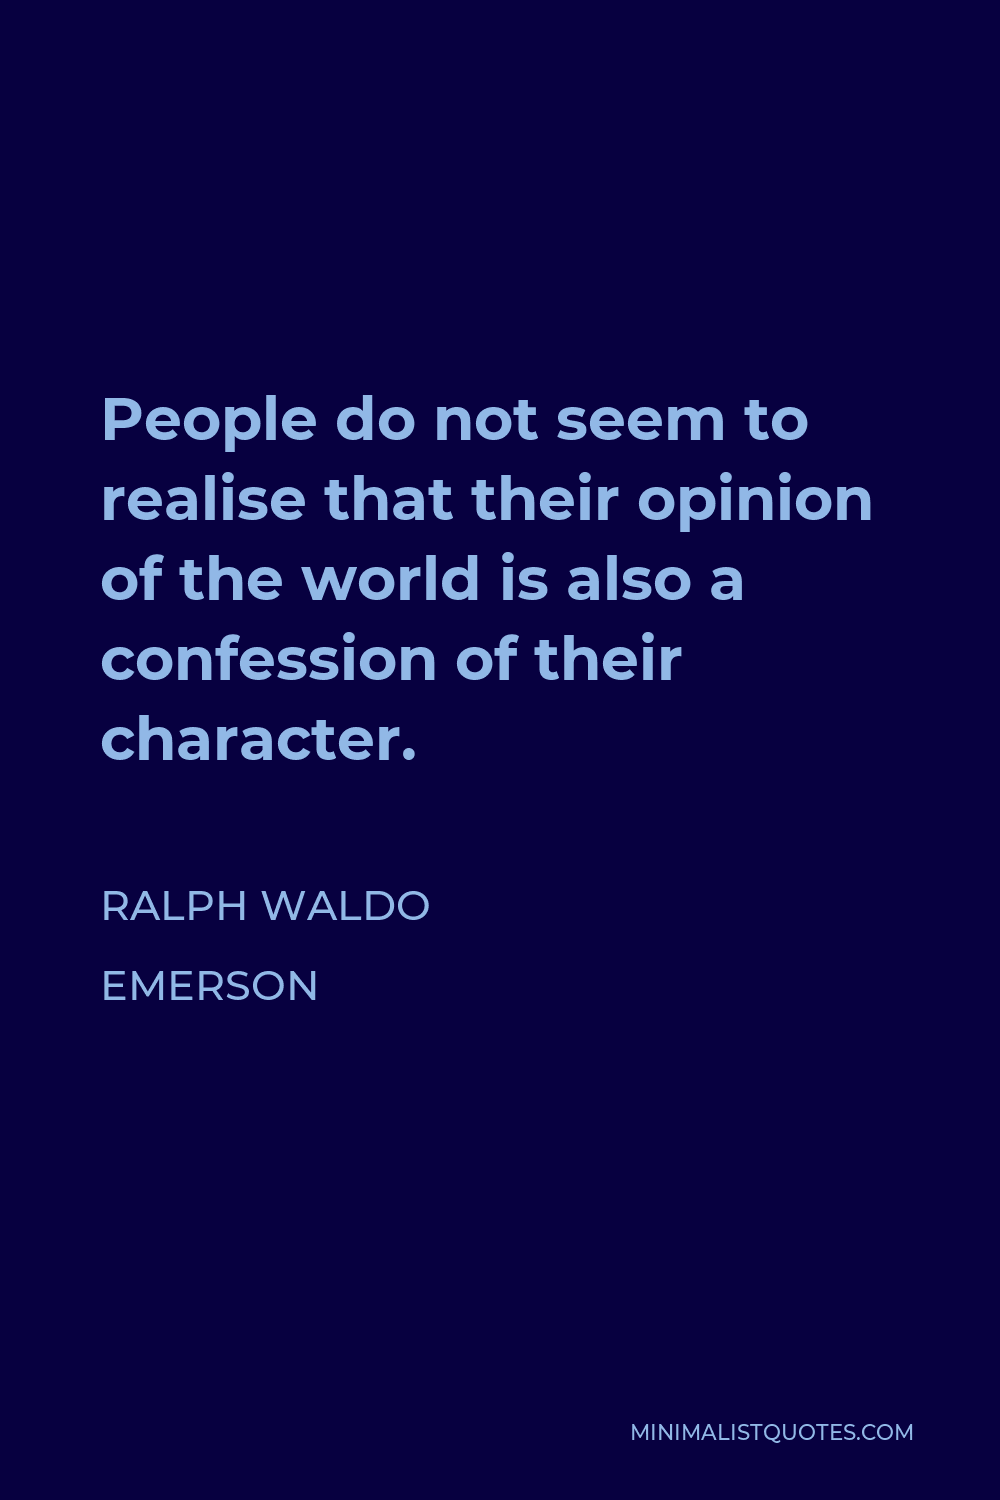 Ralph Waldo Emerson Quote - People do not seem to realise that their opinion of the world is also a confession of their character.